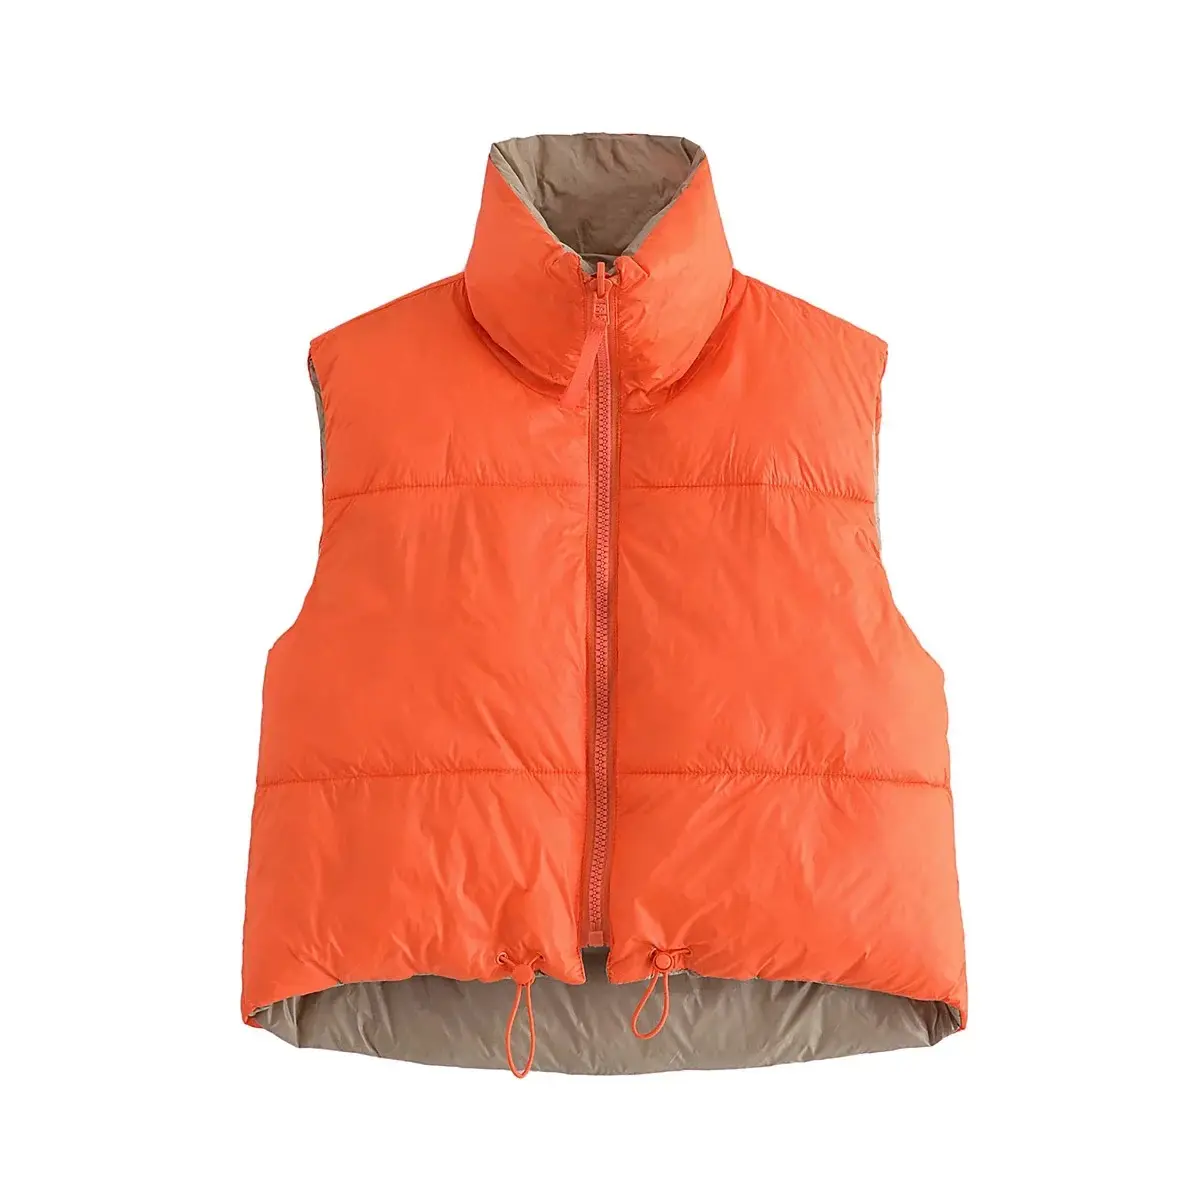 2022 Fall Winter Reversible Sleeveless Zip Up Vest Fashion Cropped Cotton-padded Stand Collar Candy Color Warm Cotton Vest